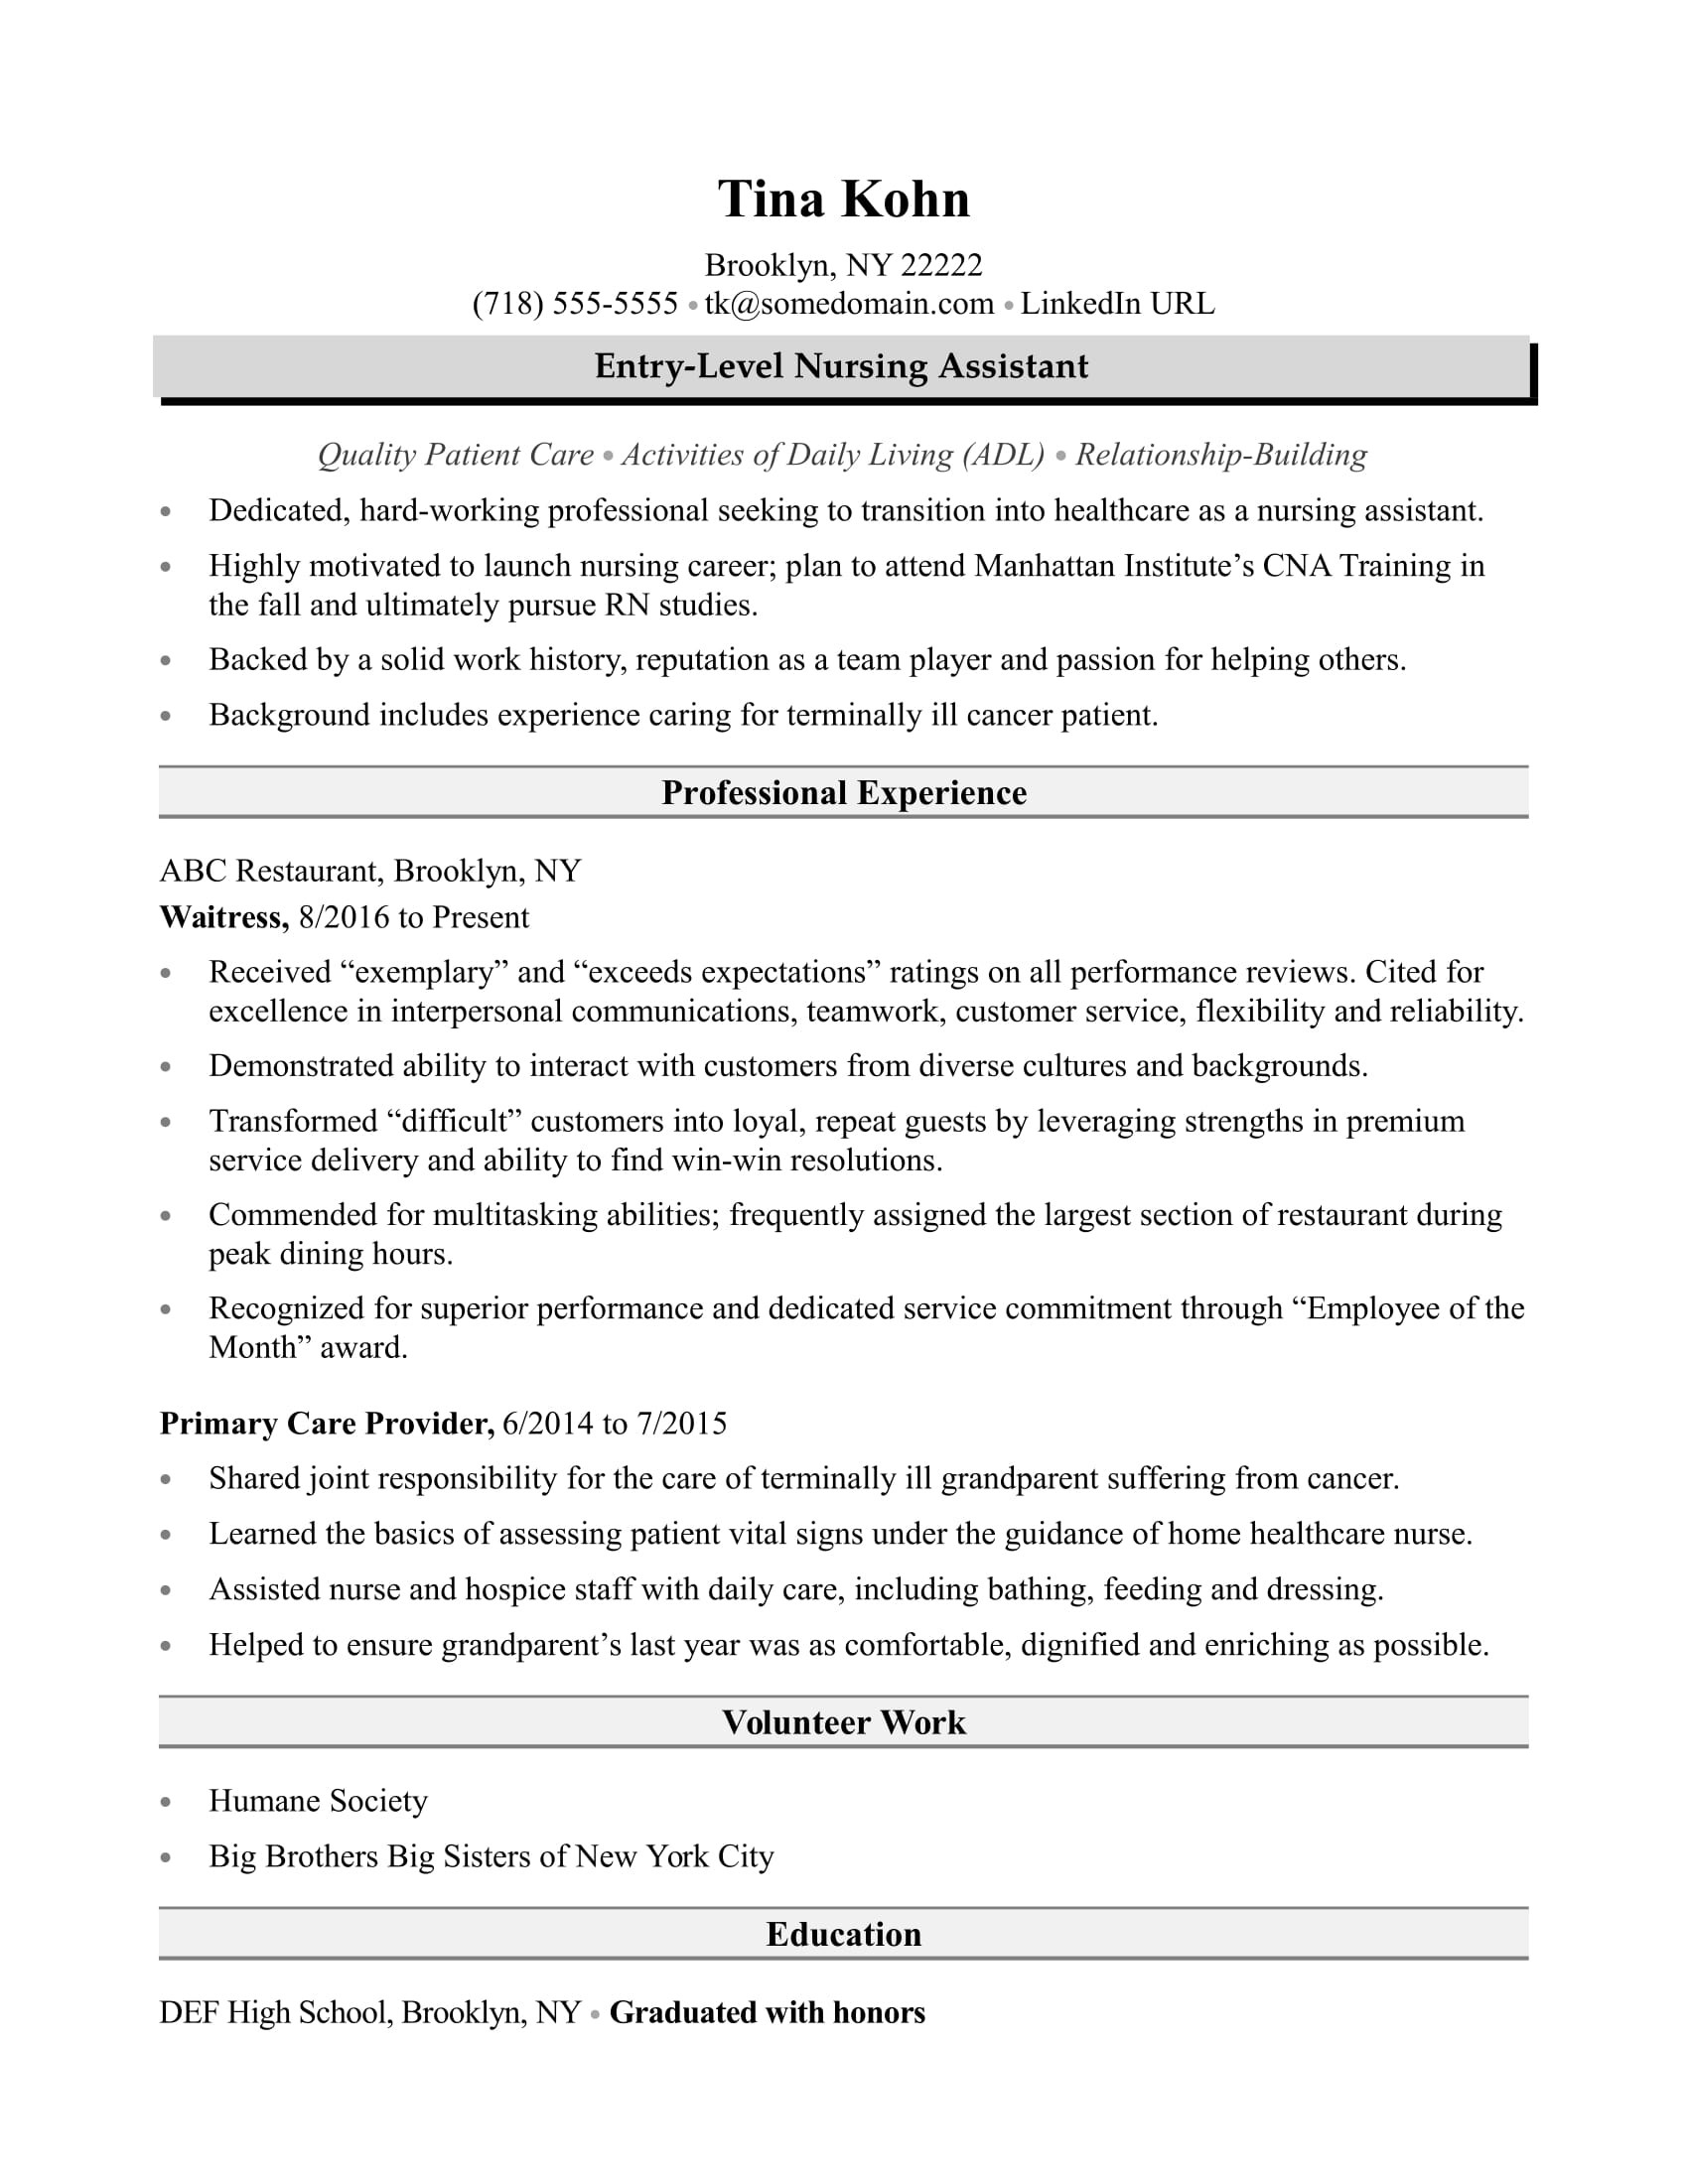 Sample Resume for Cna with Previous Experience Nursing assistant Resume Sample Monster.com